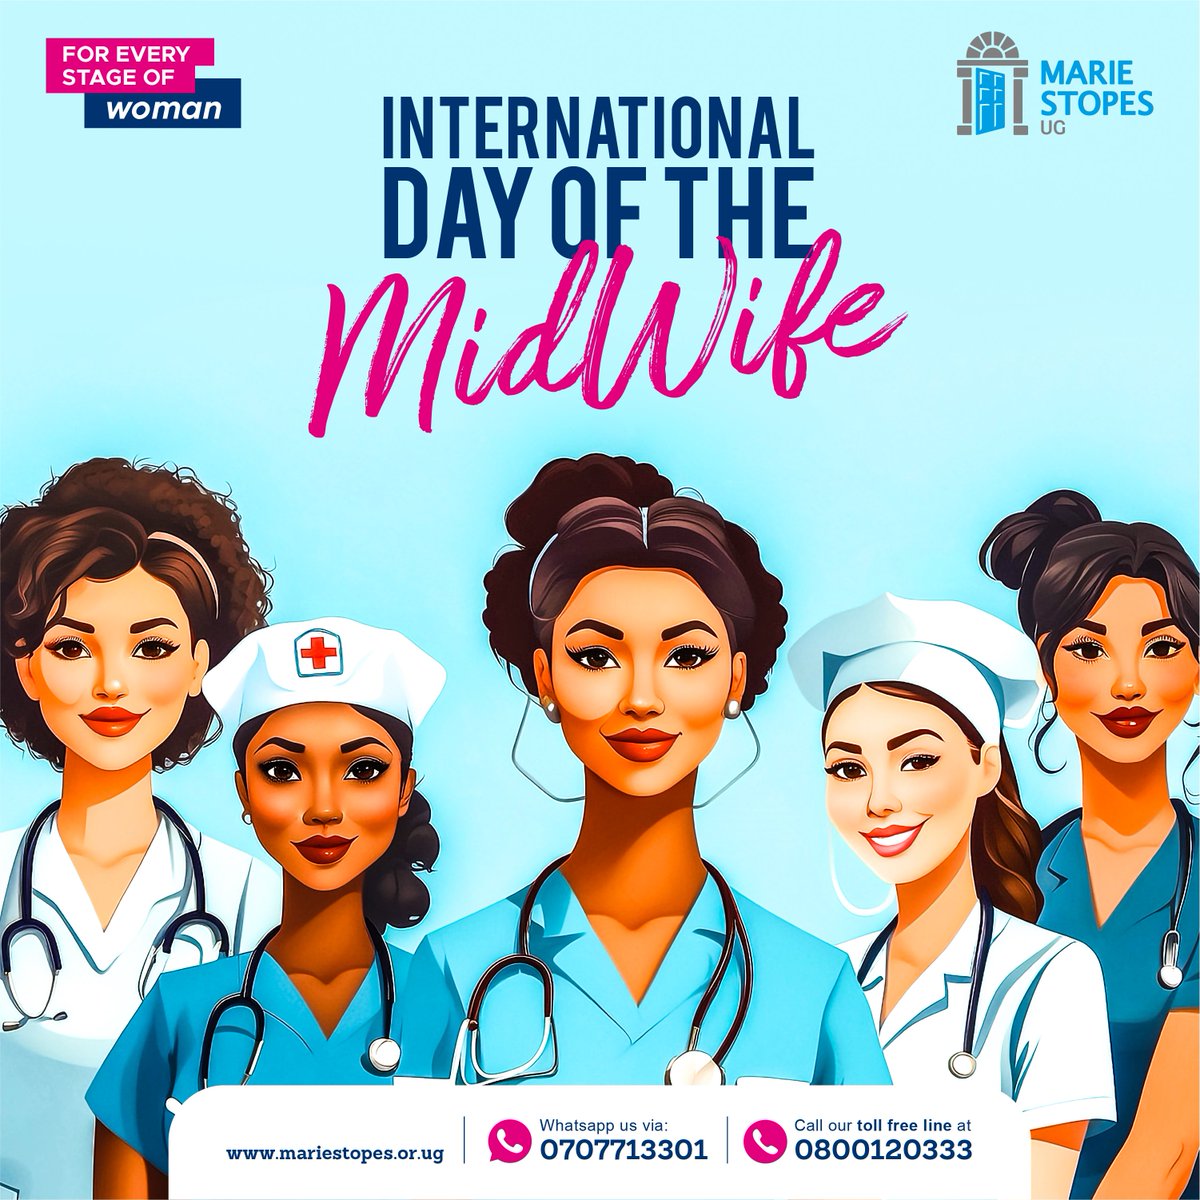 A special shout out to all the midwives who help expectant mothers on their journey to delivery. And to all Marie Stopes midwives, we are proud of all you do to support, empower and inspire women and families. Keep shining! #IDM2024 #Midwives4All #ForEveryStageOfWoman